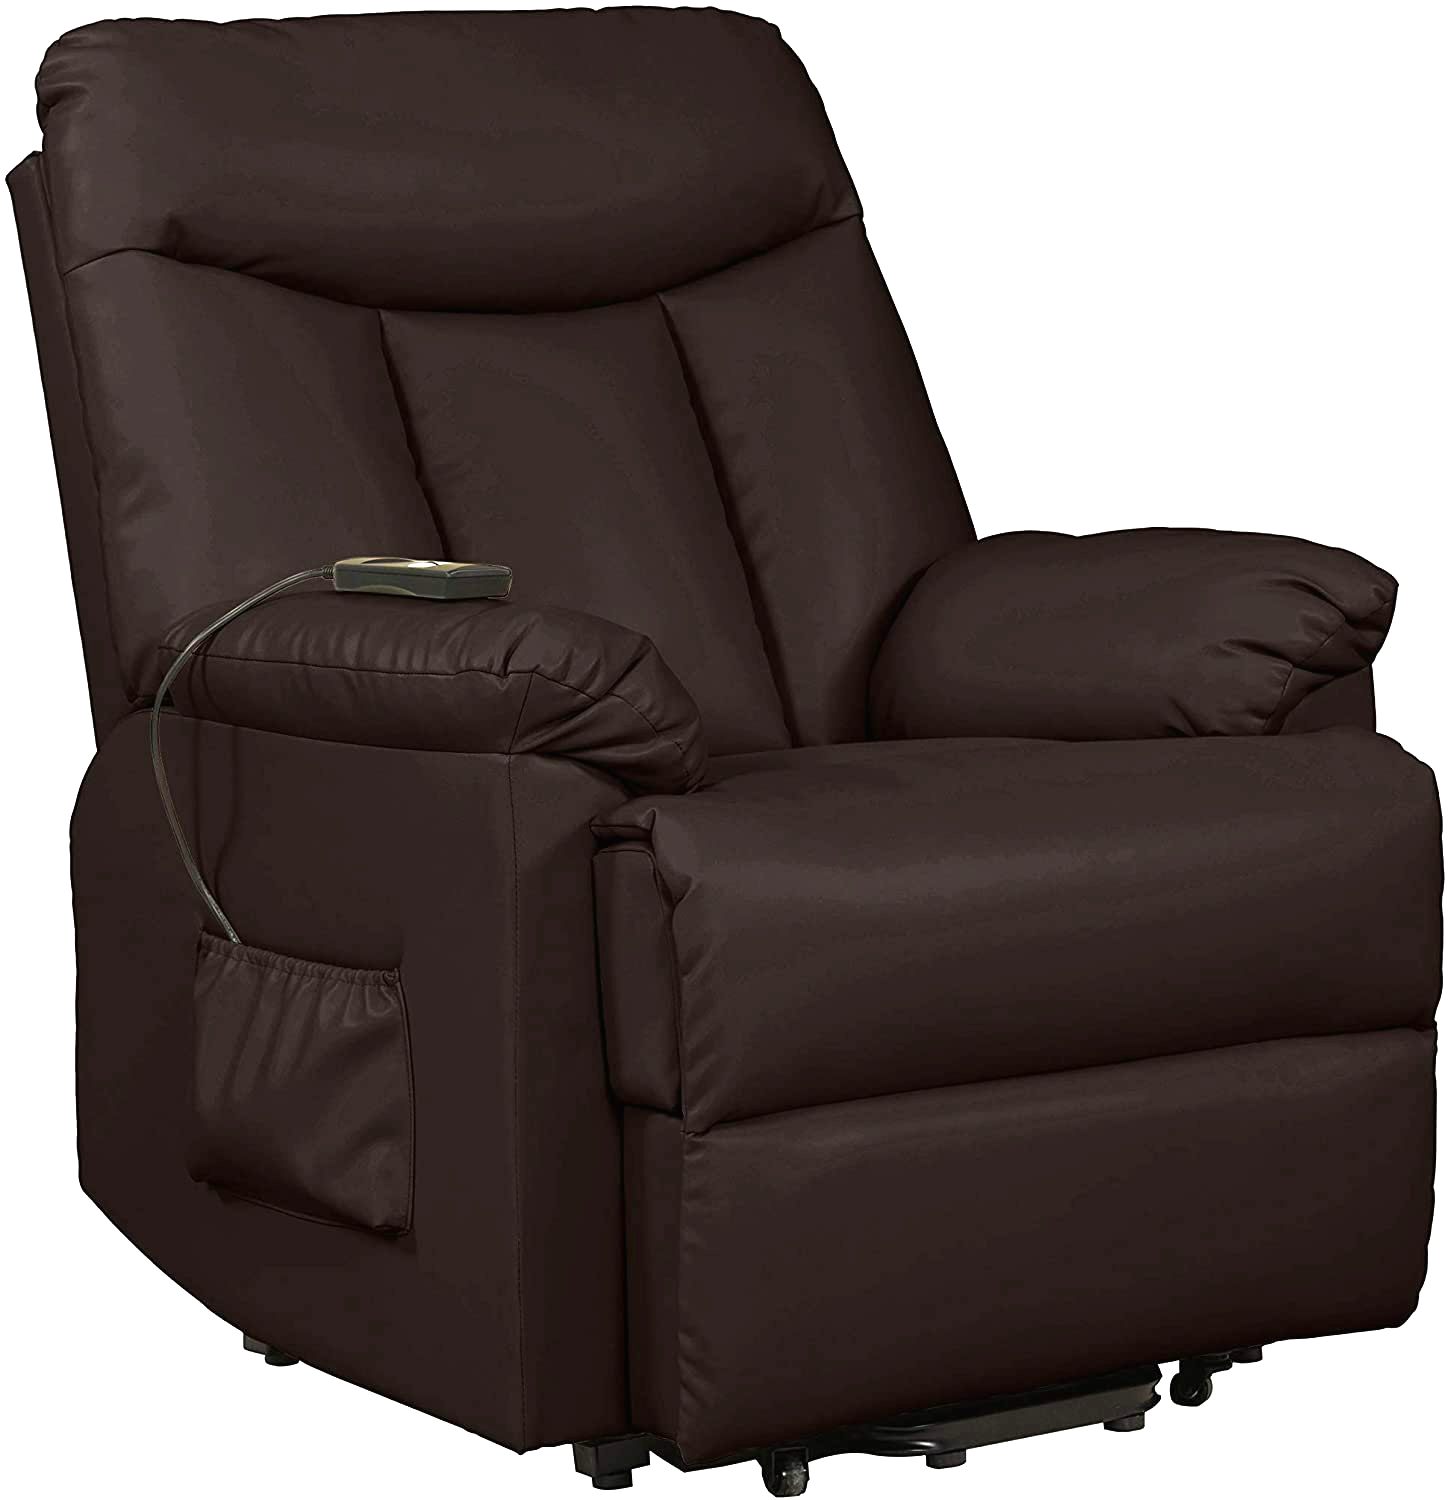 10 Best Living Room Chairs for Back Pain Relief (2021